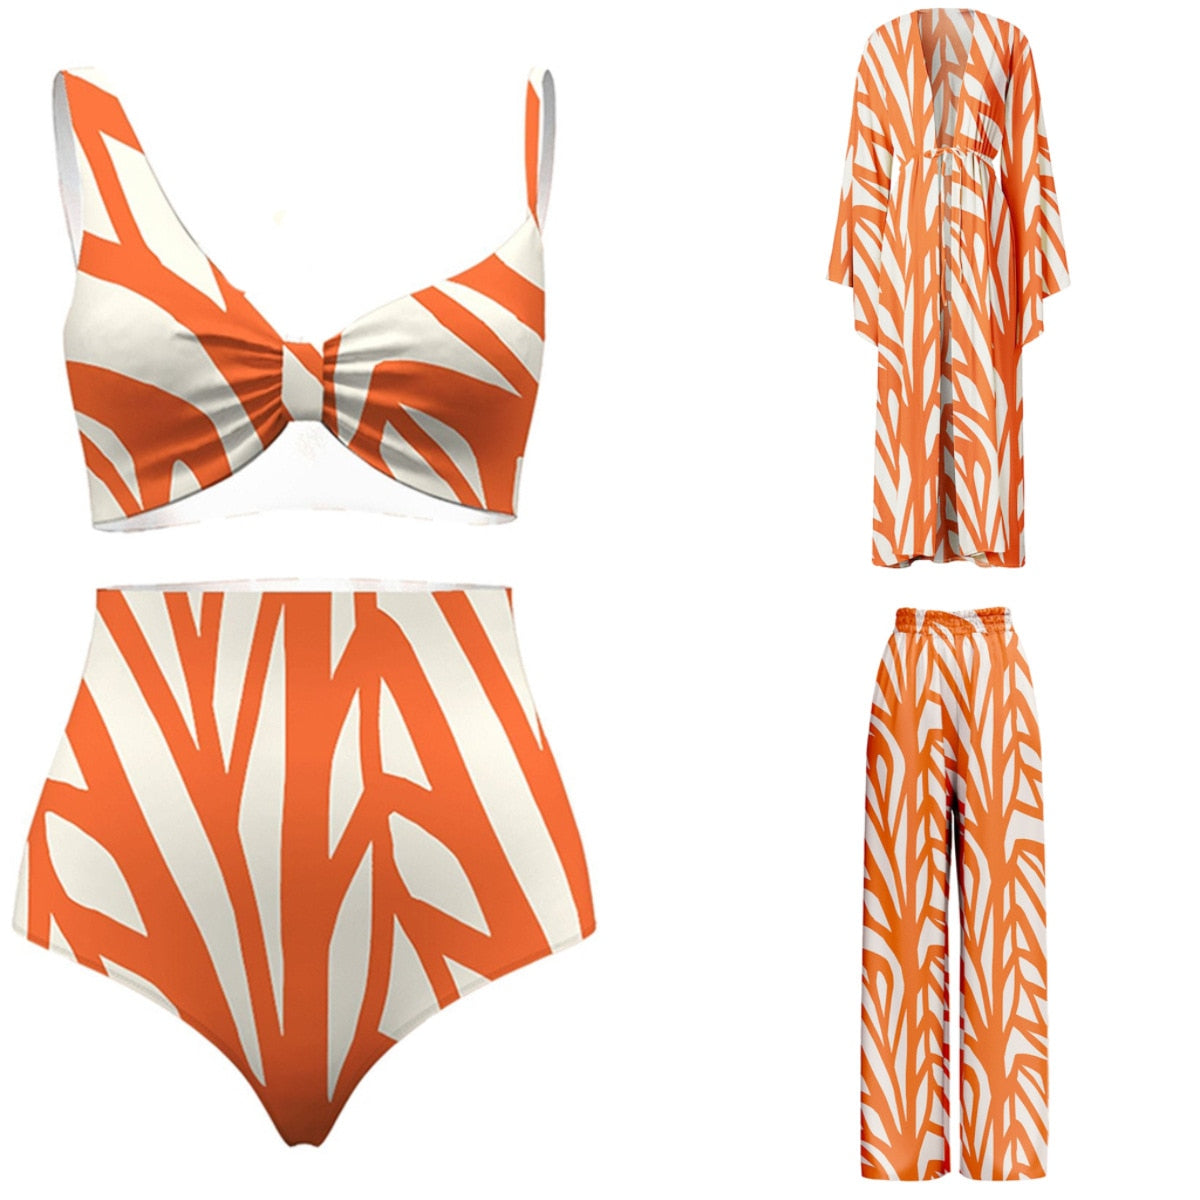 Women Swimsuits Orange Abstract Art Style Printed Bikini with Different Designs - kmtell.com